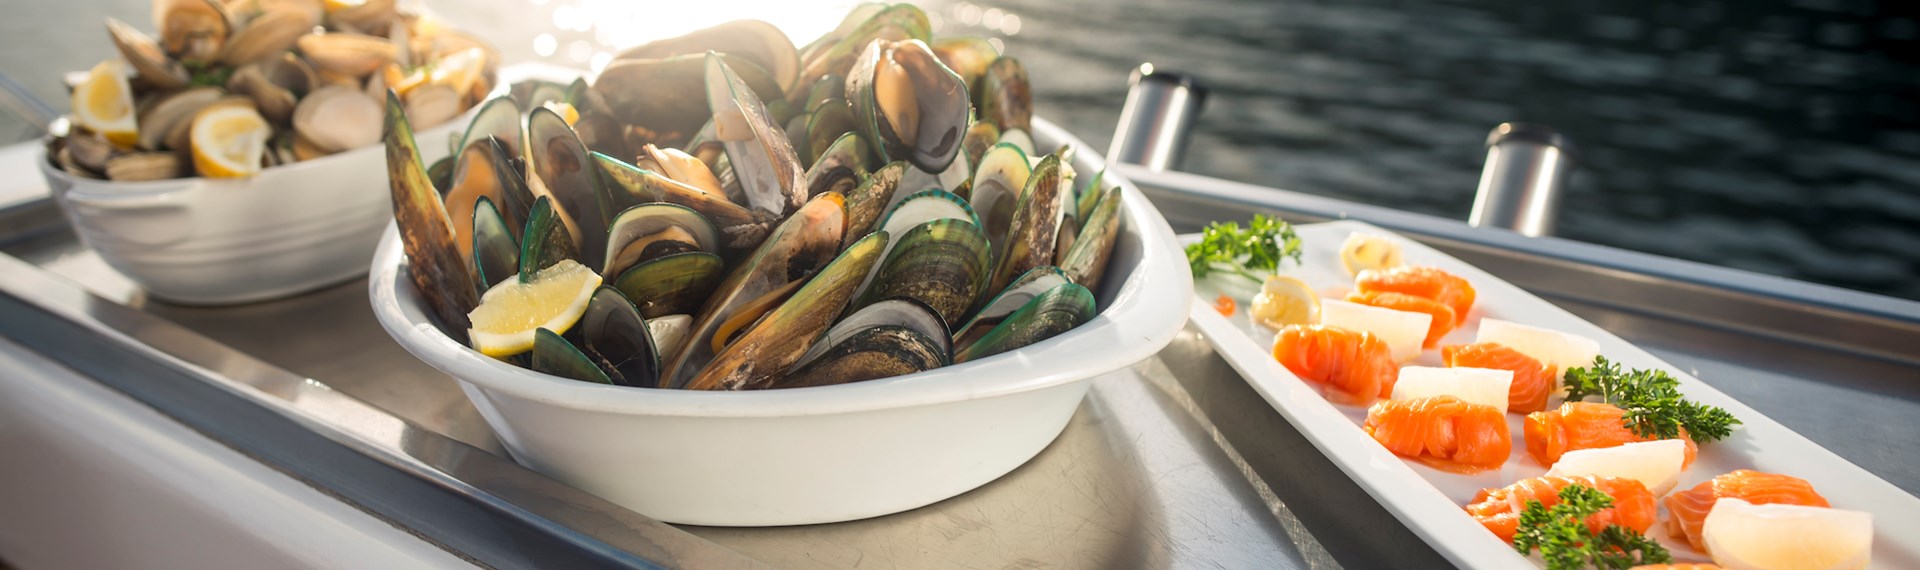 Cloudy Bay Clams, Greenshell mussels and Regal salmon are served at the source on a Seafood Odyssea cruise in New Zealand's spectacular Marlborough Sounds from Picton.